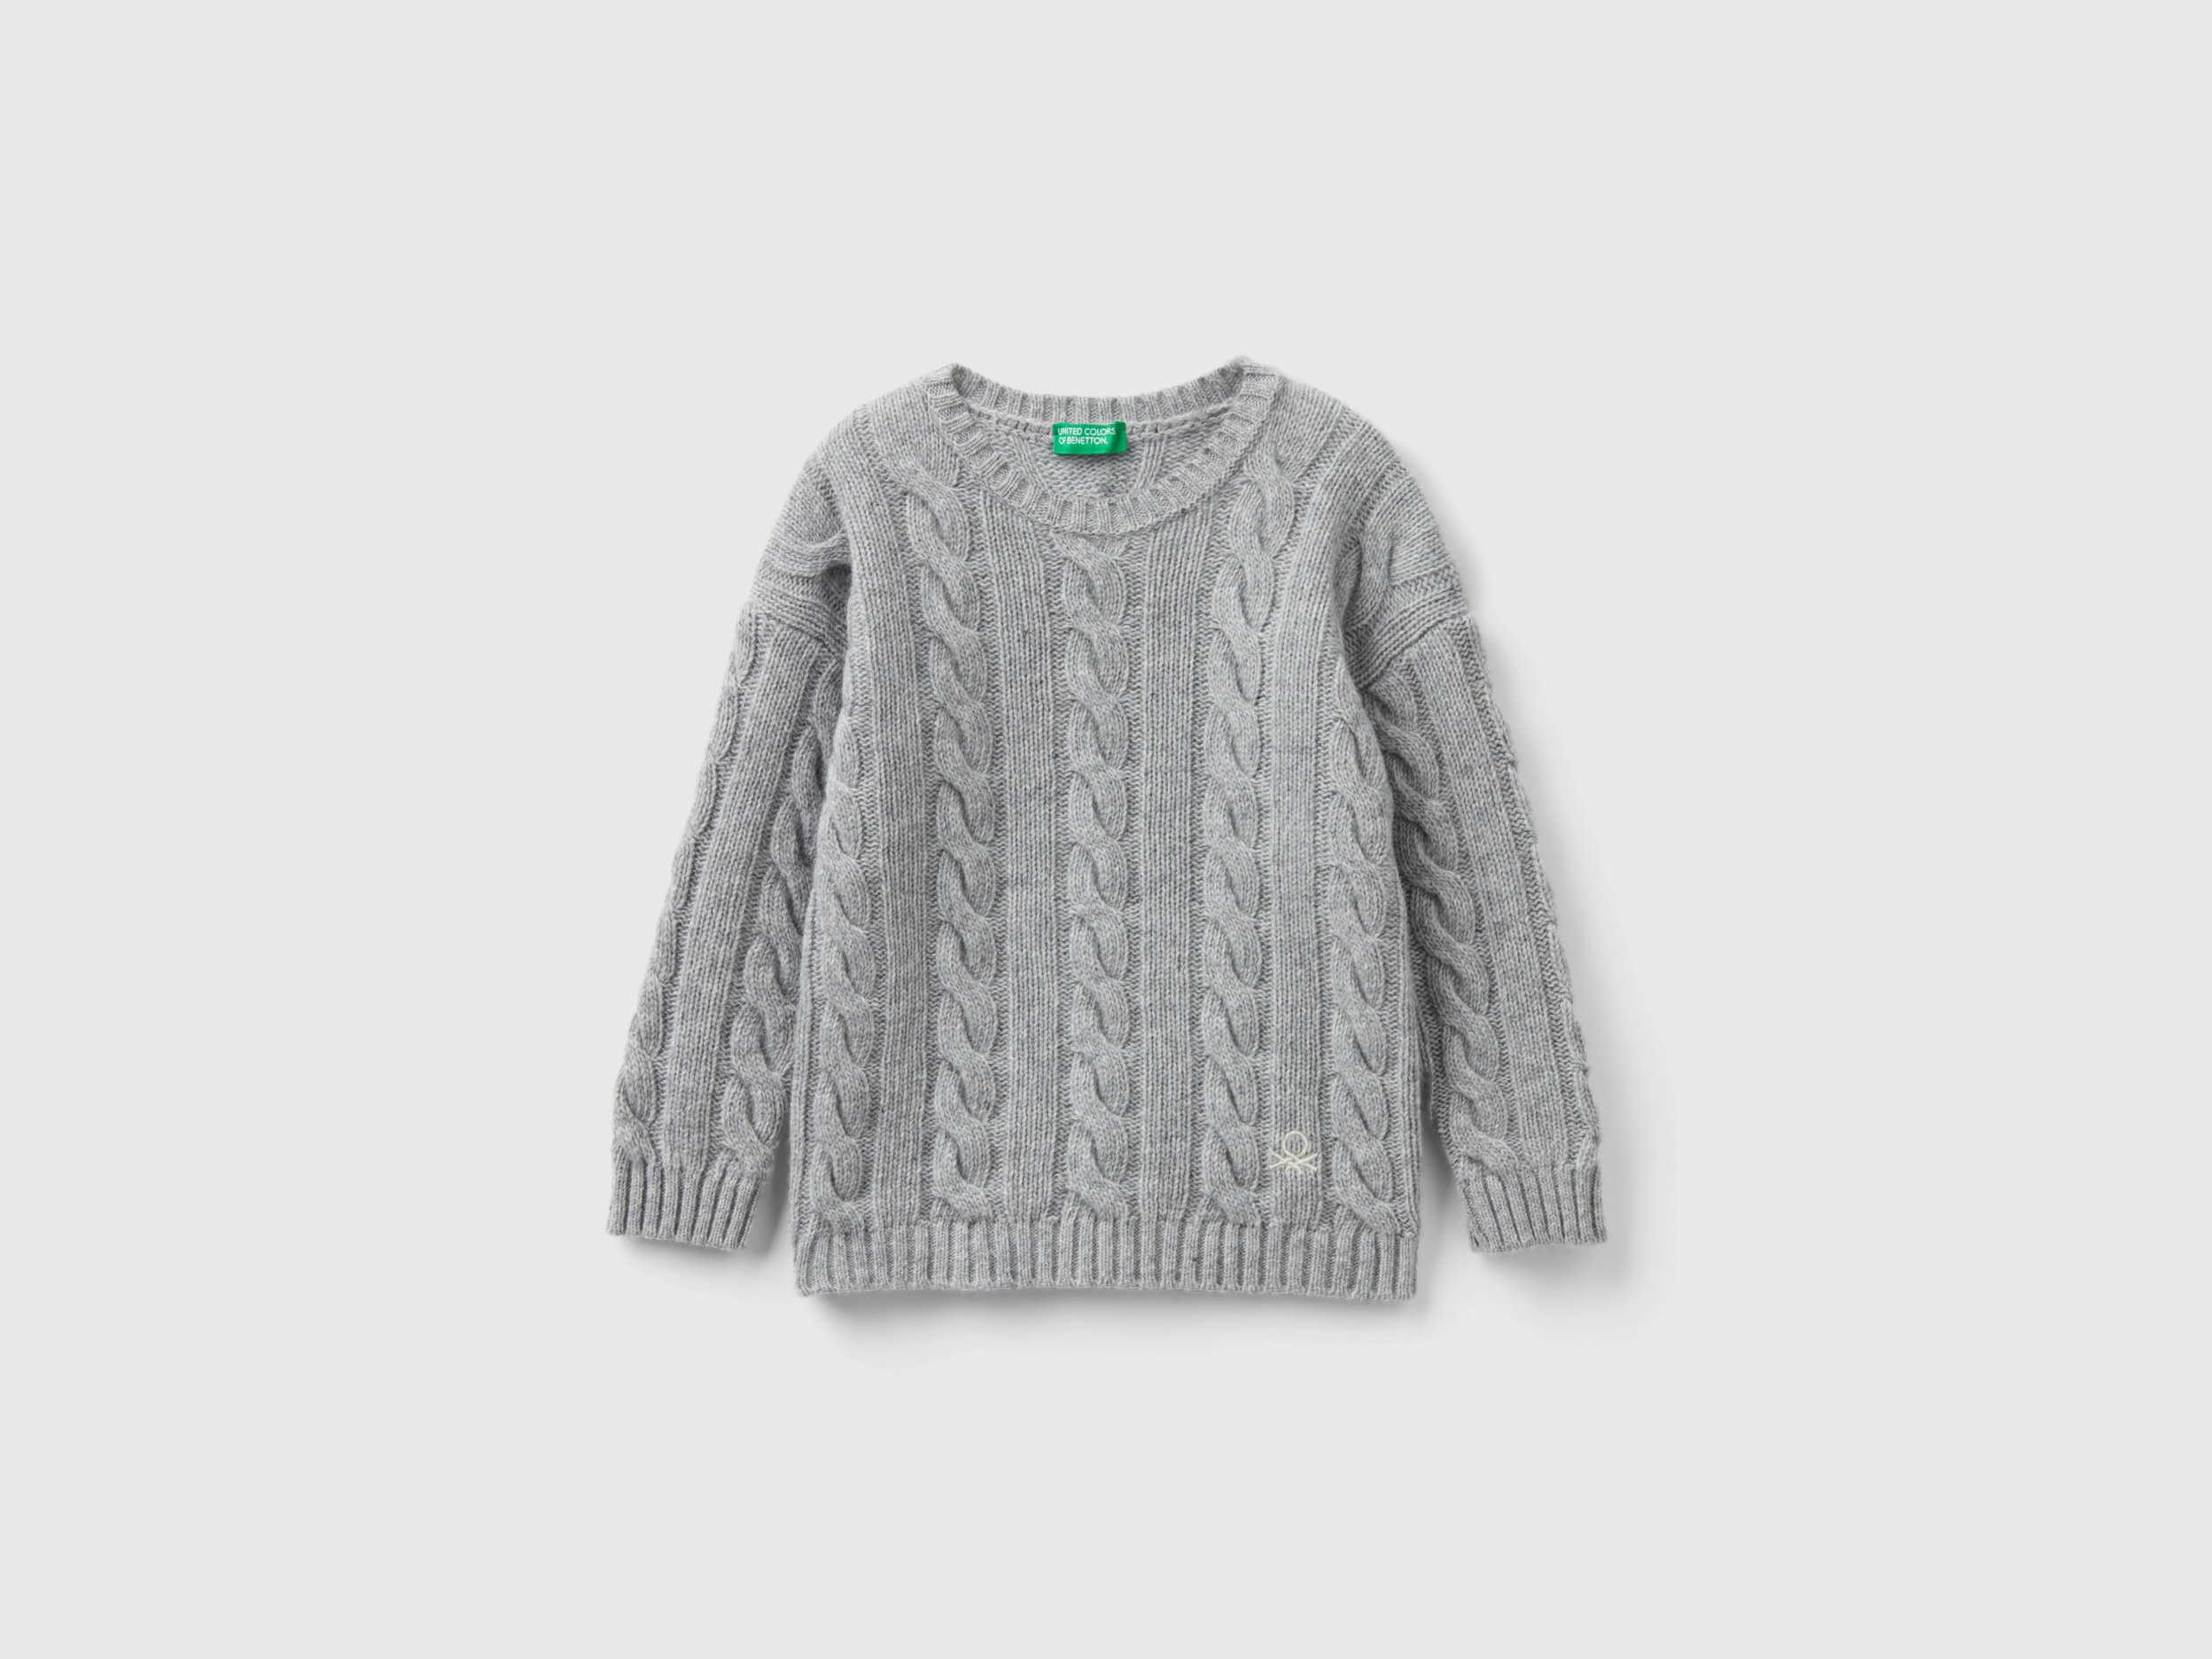 Benetton, Cable Knit Sweater In Wool Blend, size 12-18, Gray, Kids